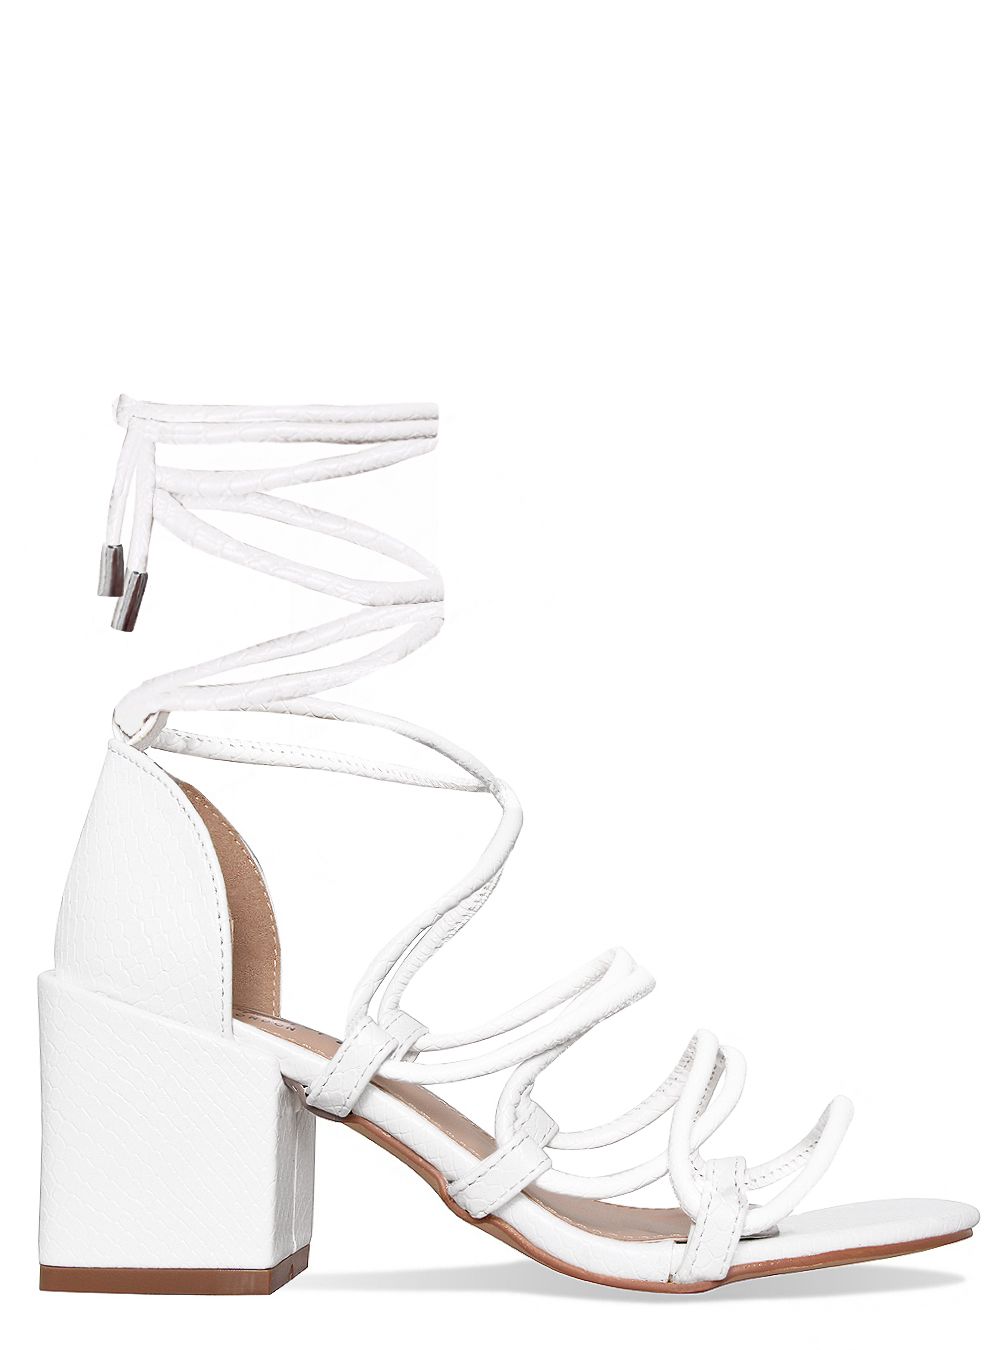 white block heels lace up